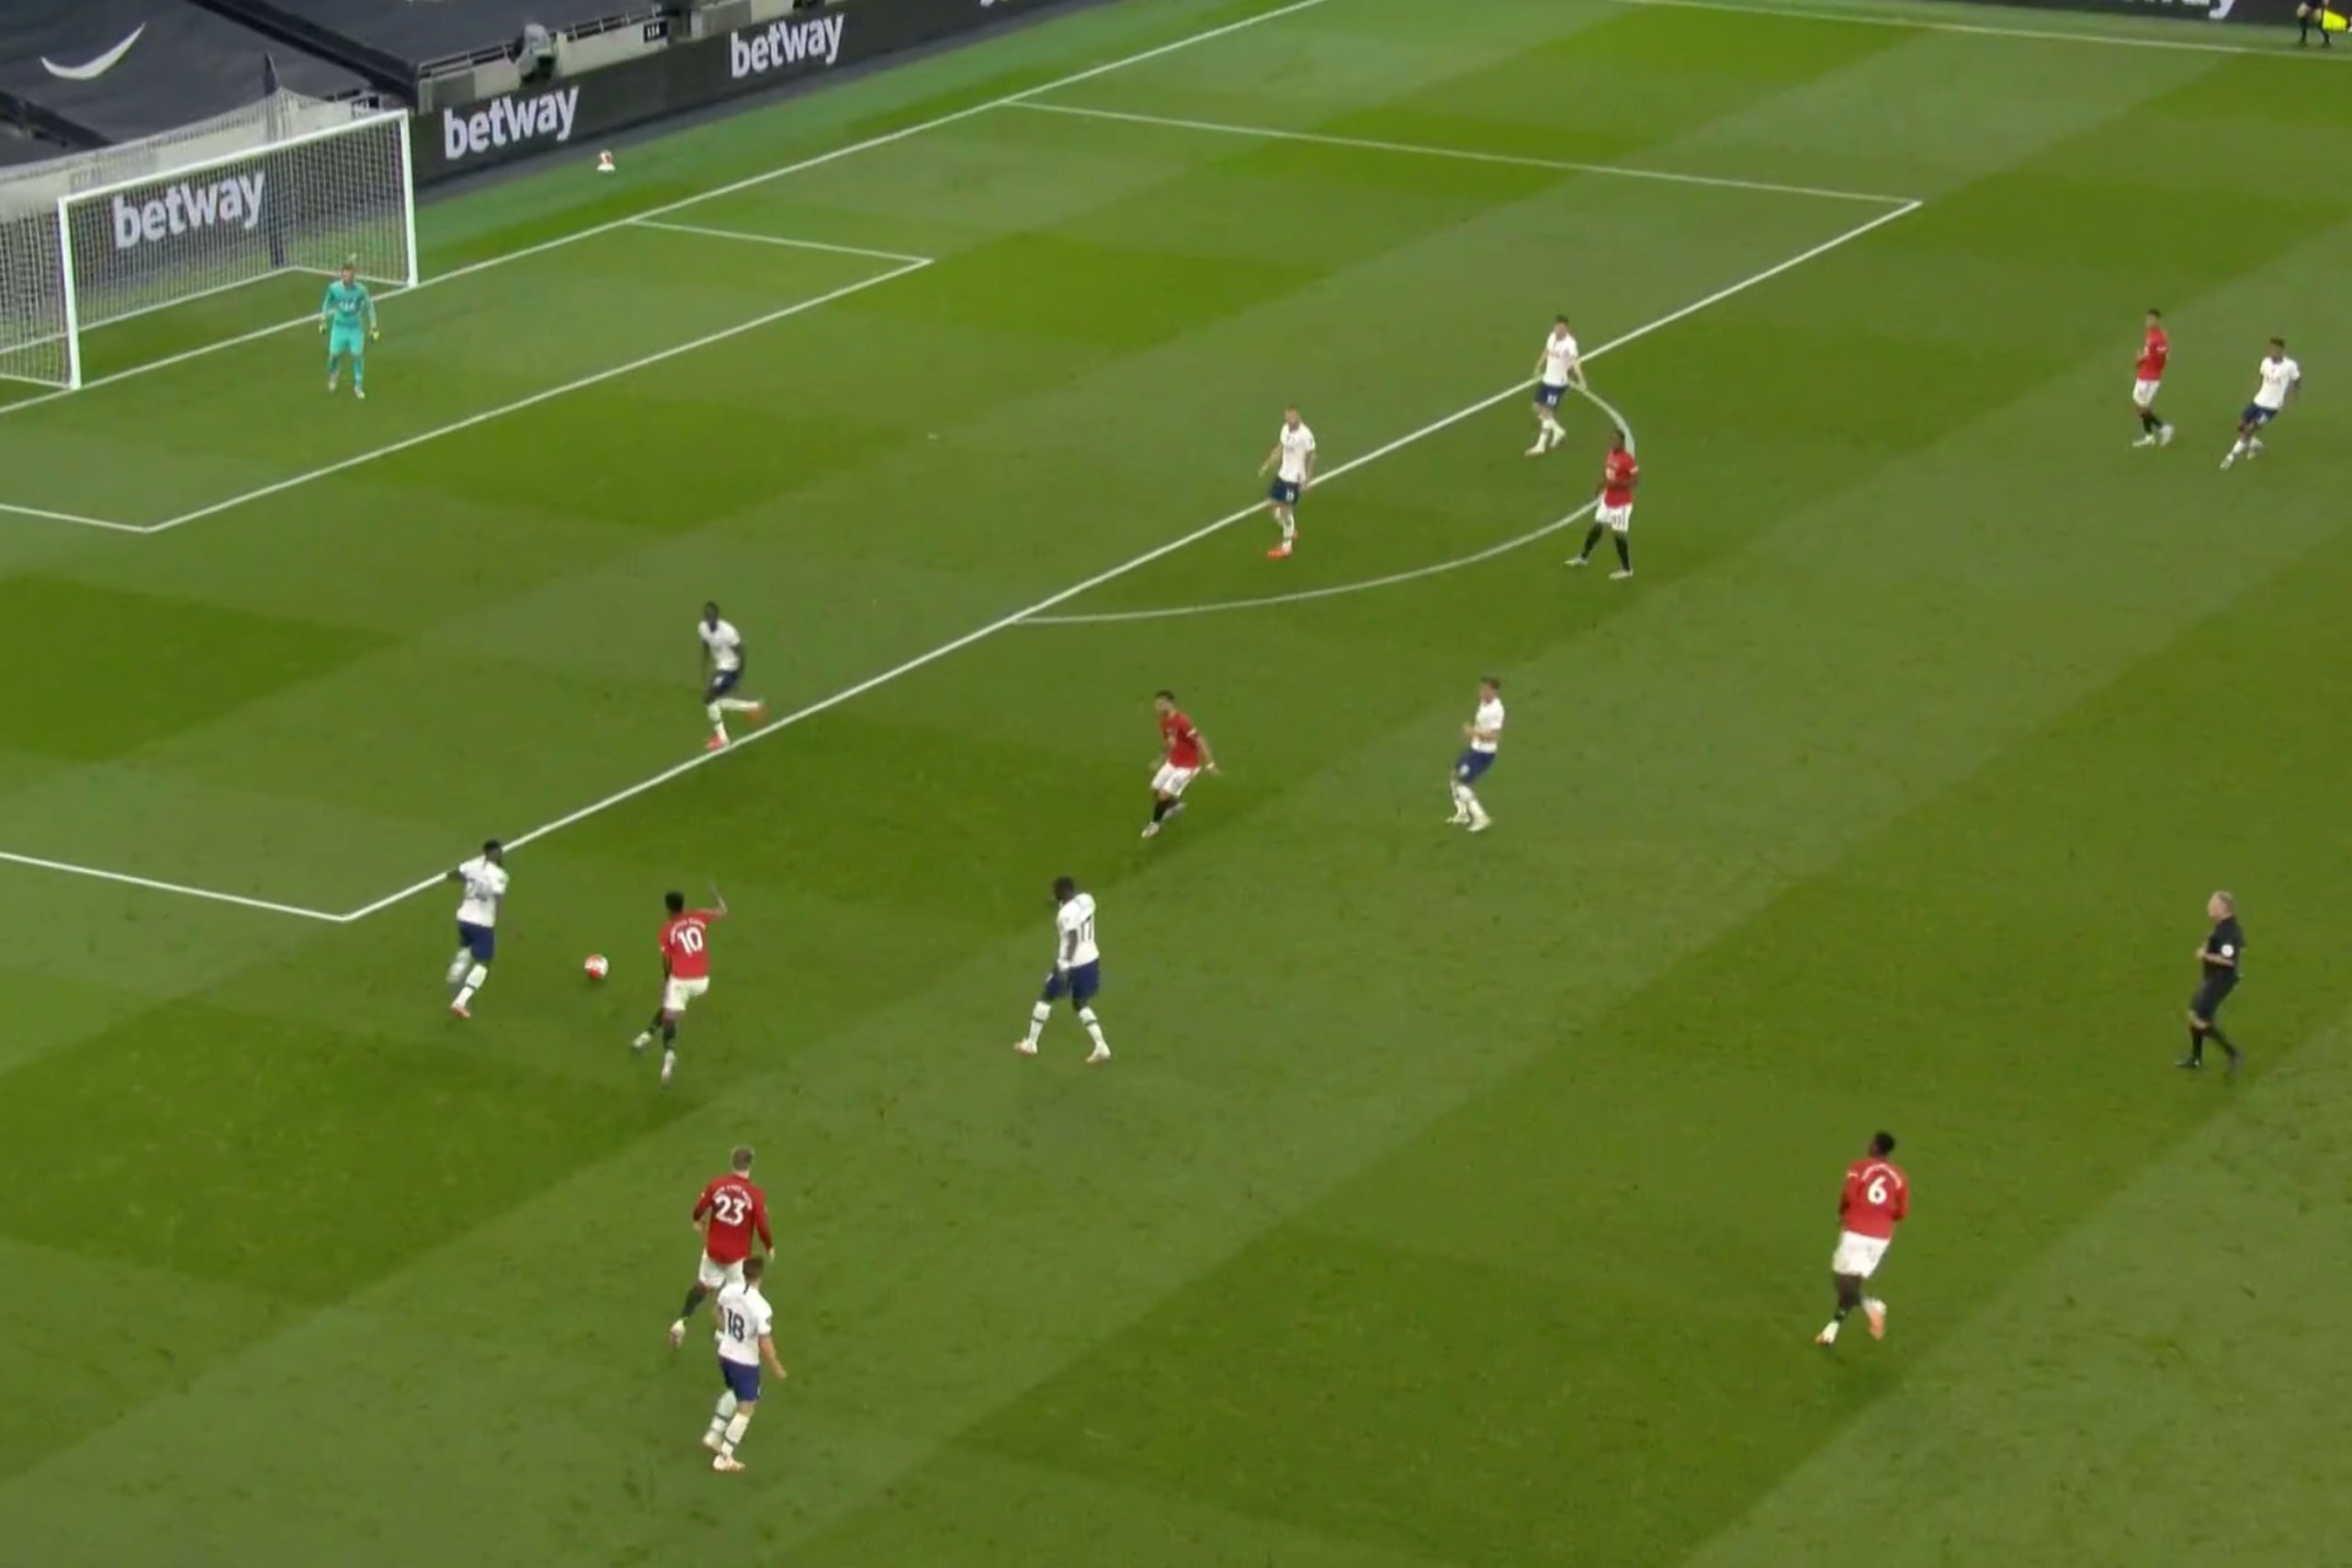 The Man Utd play that carved open Tottenham Hotspur on Friday